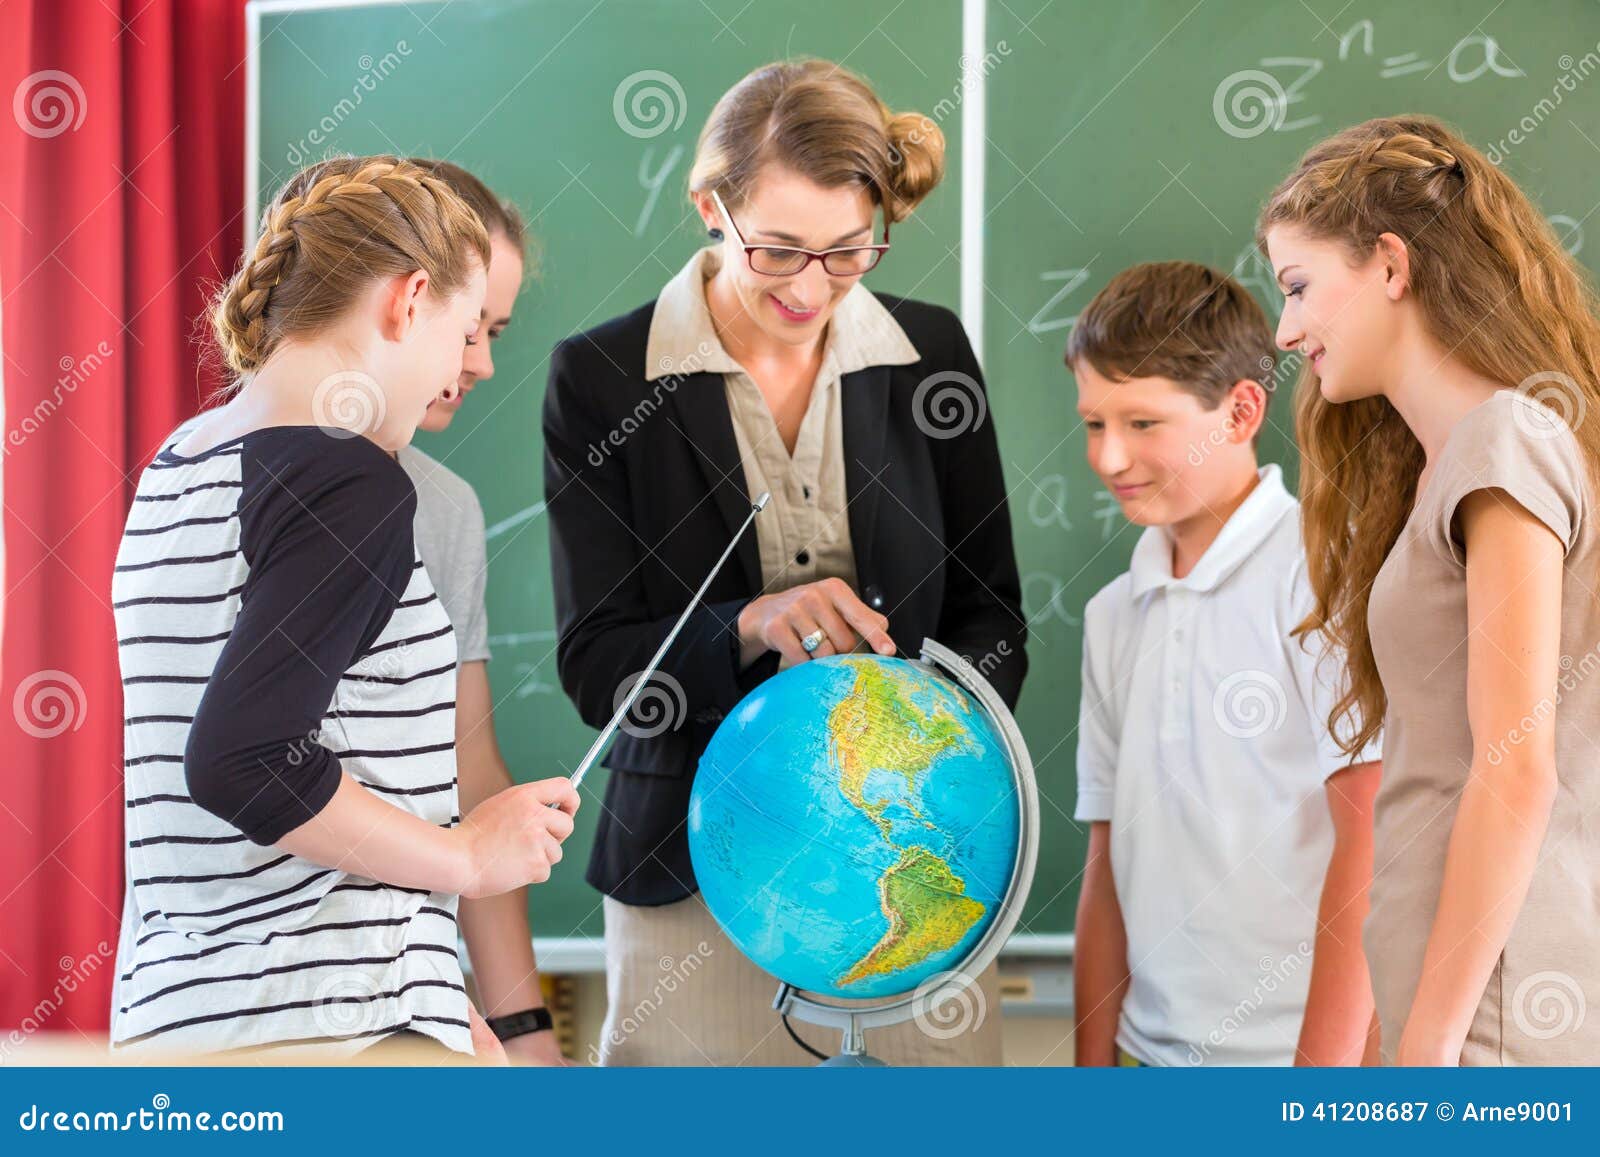 teacher educate students having geography lessons in school